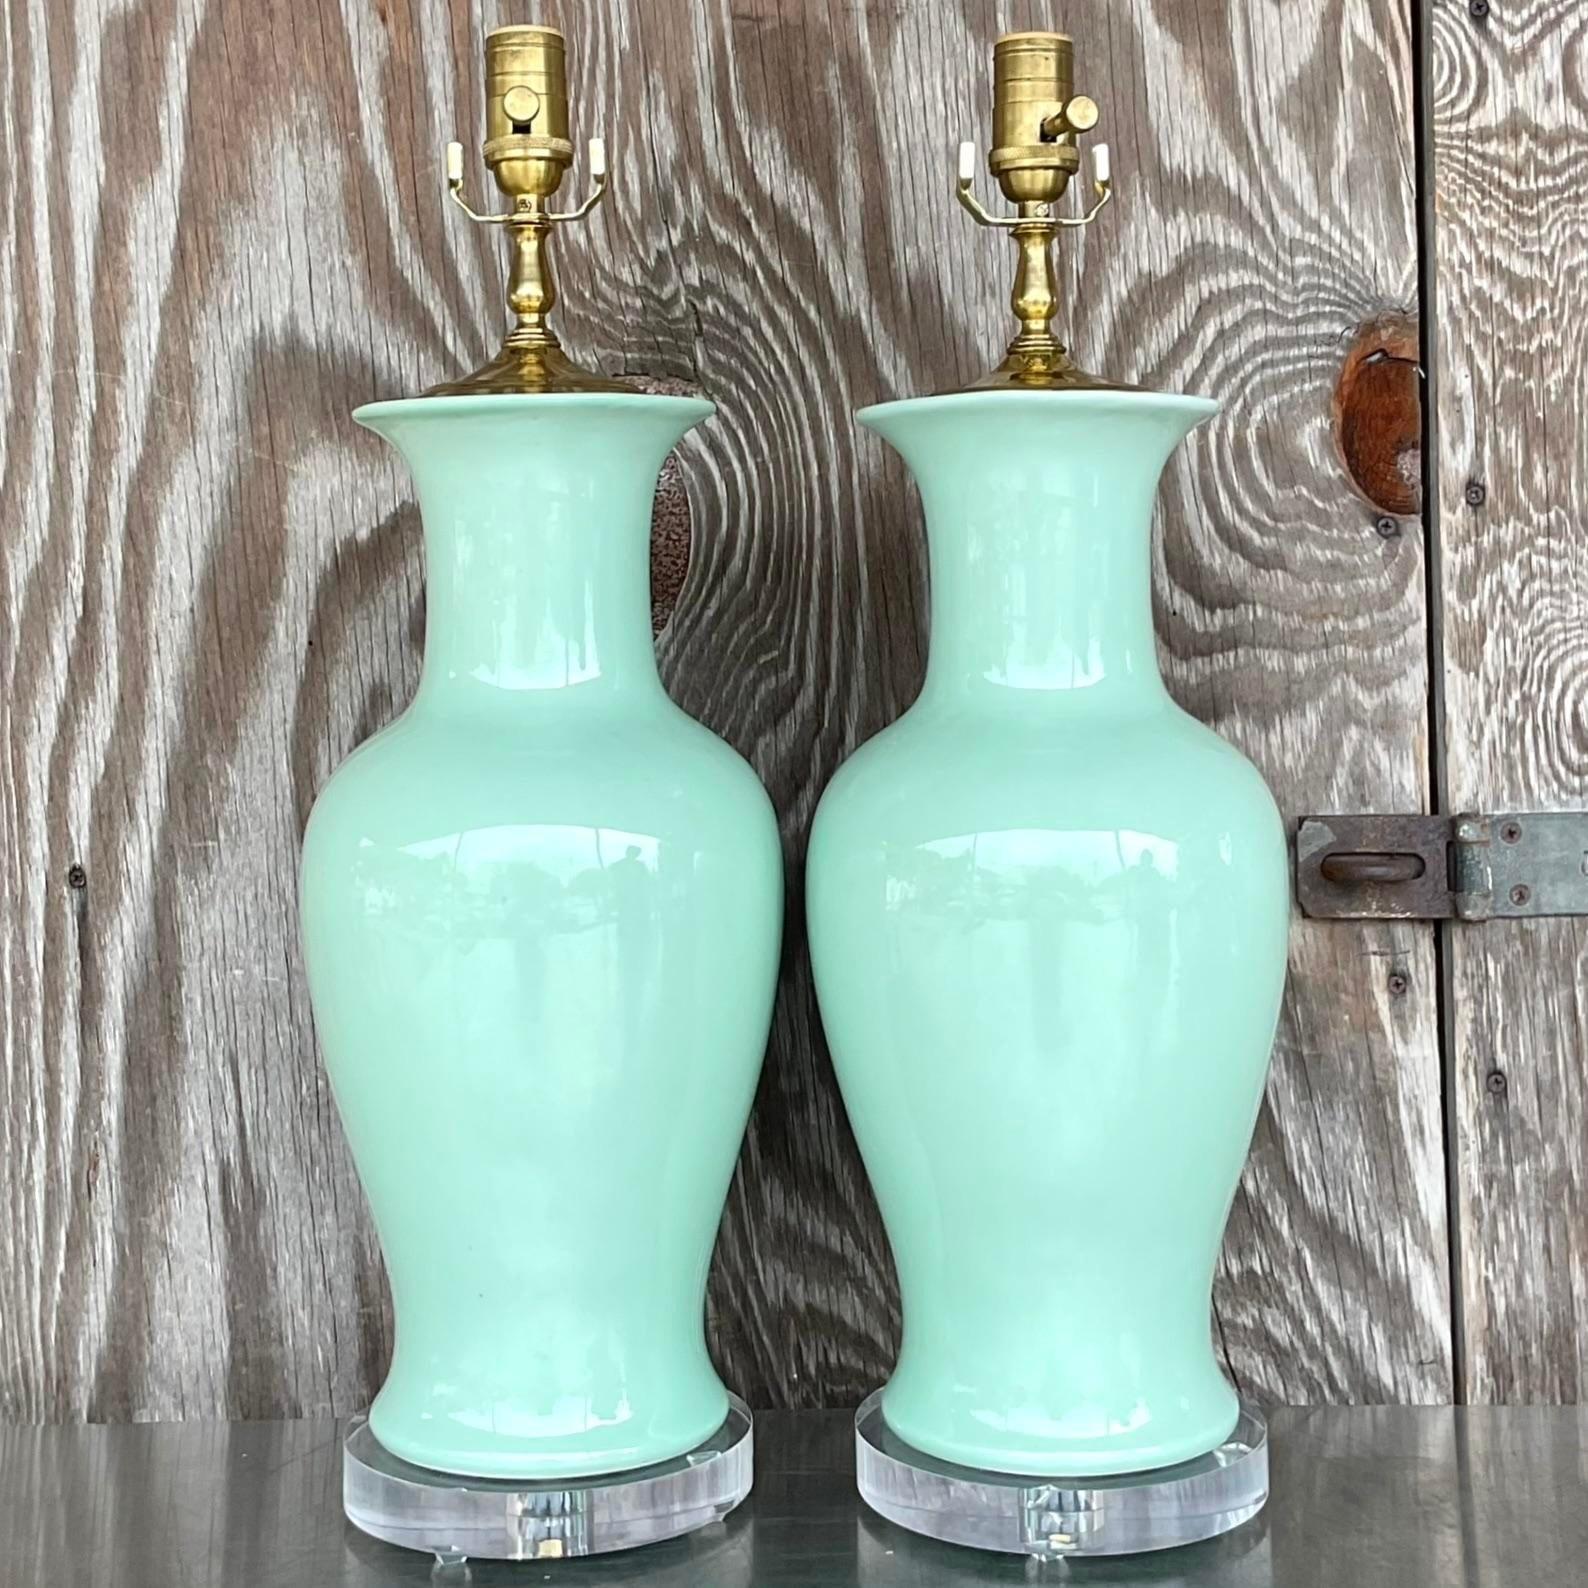 American Late 20th Century Vintage Regency Glazed Ceramic Table Lamps - a Pair For Sale